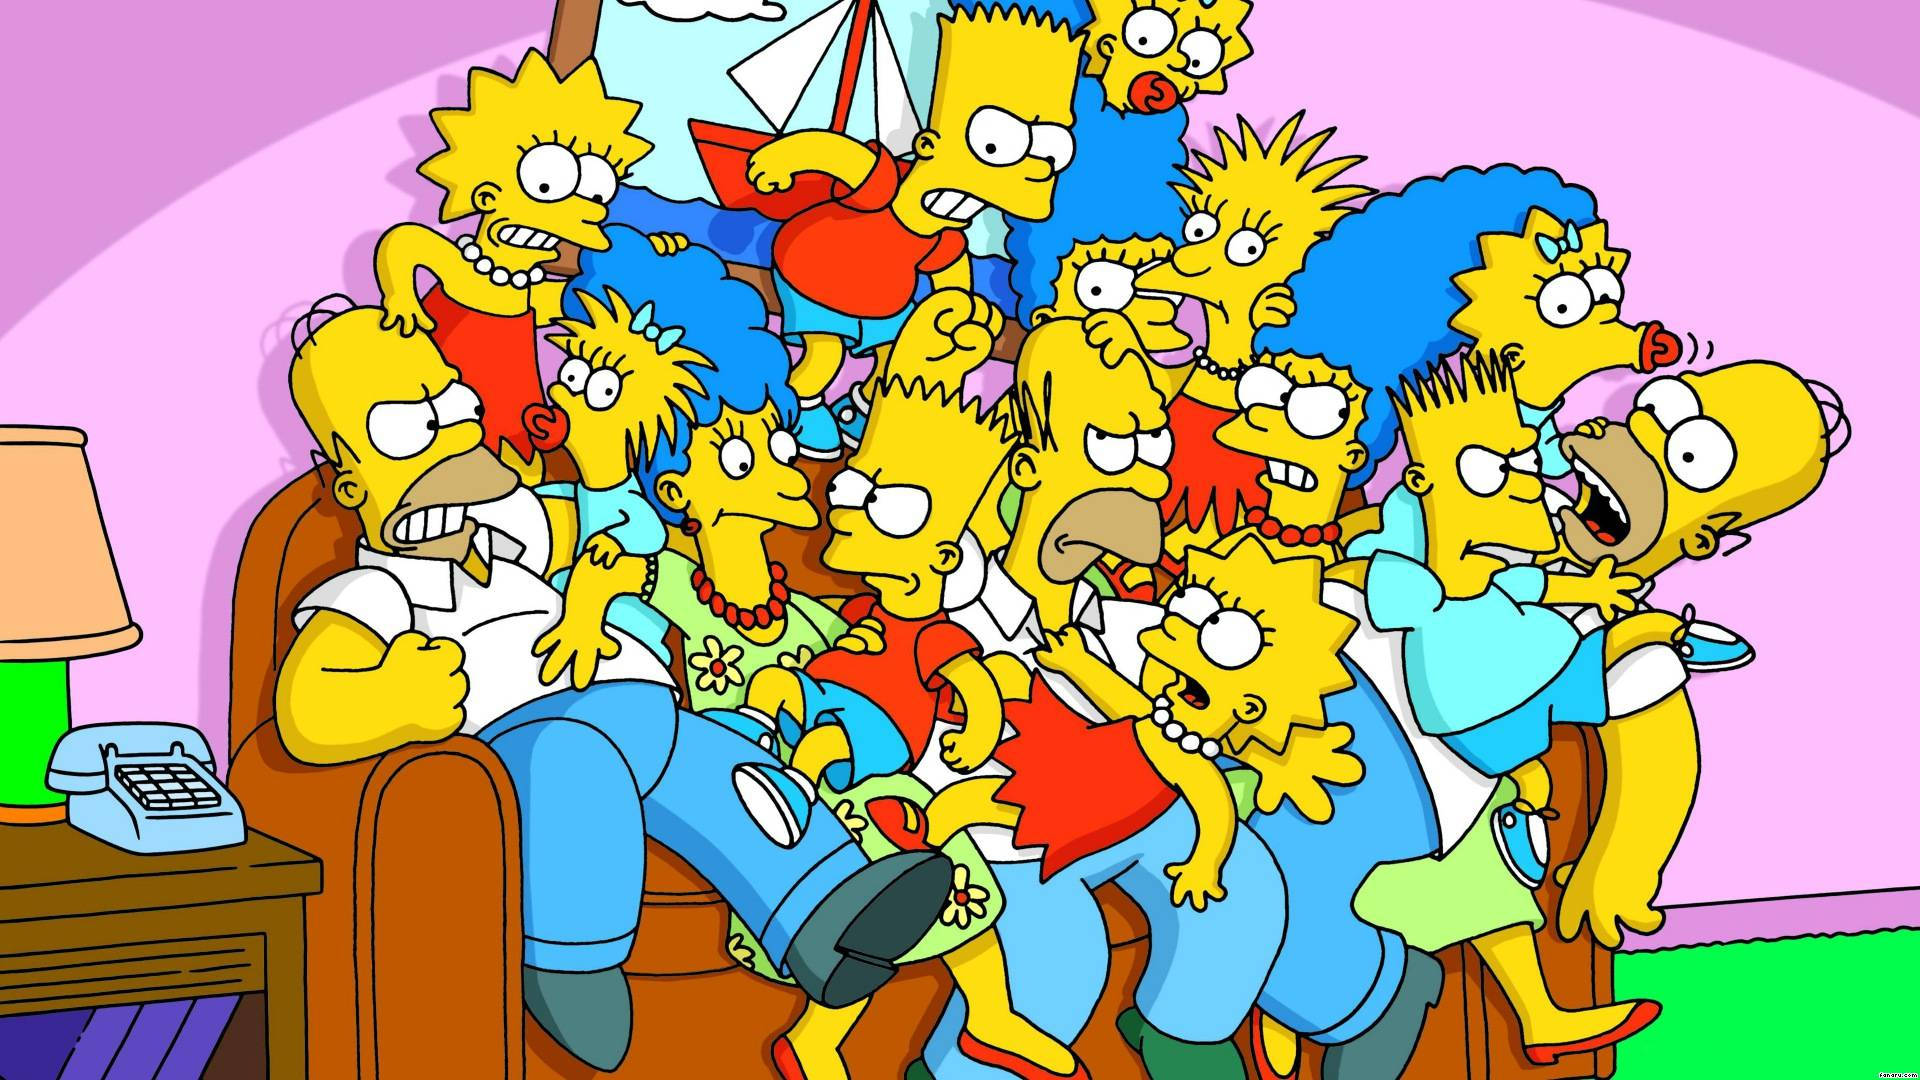 The Simpsons Characters In Chaos